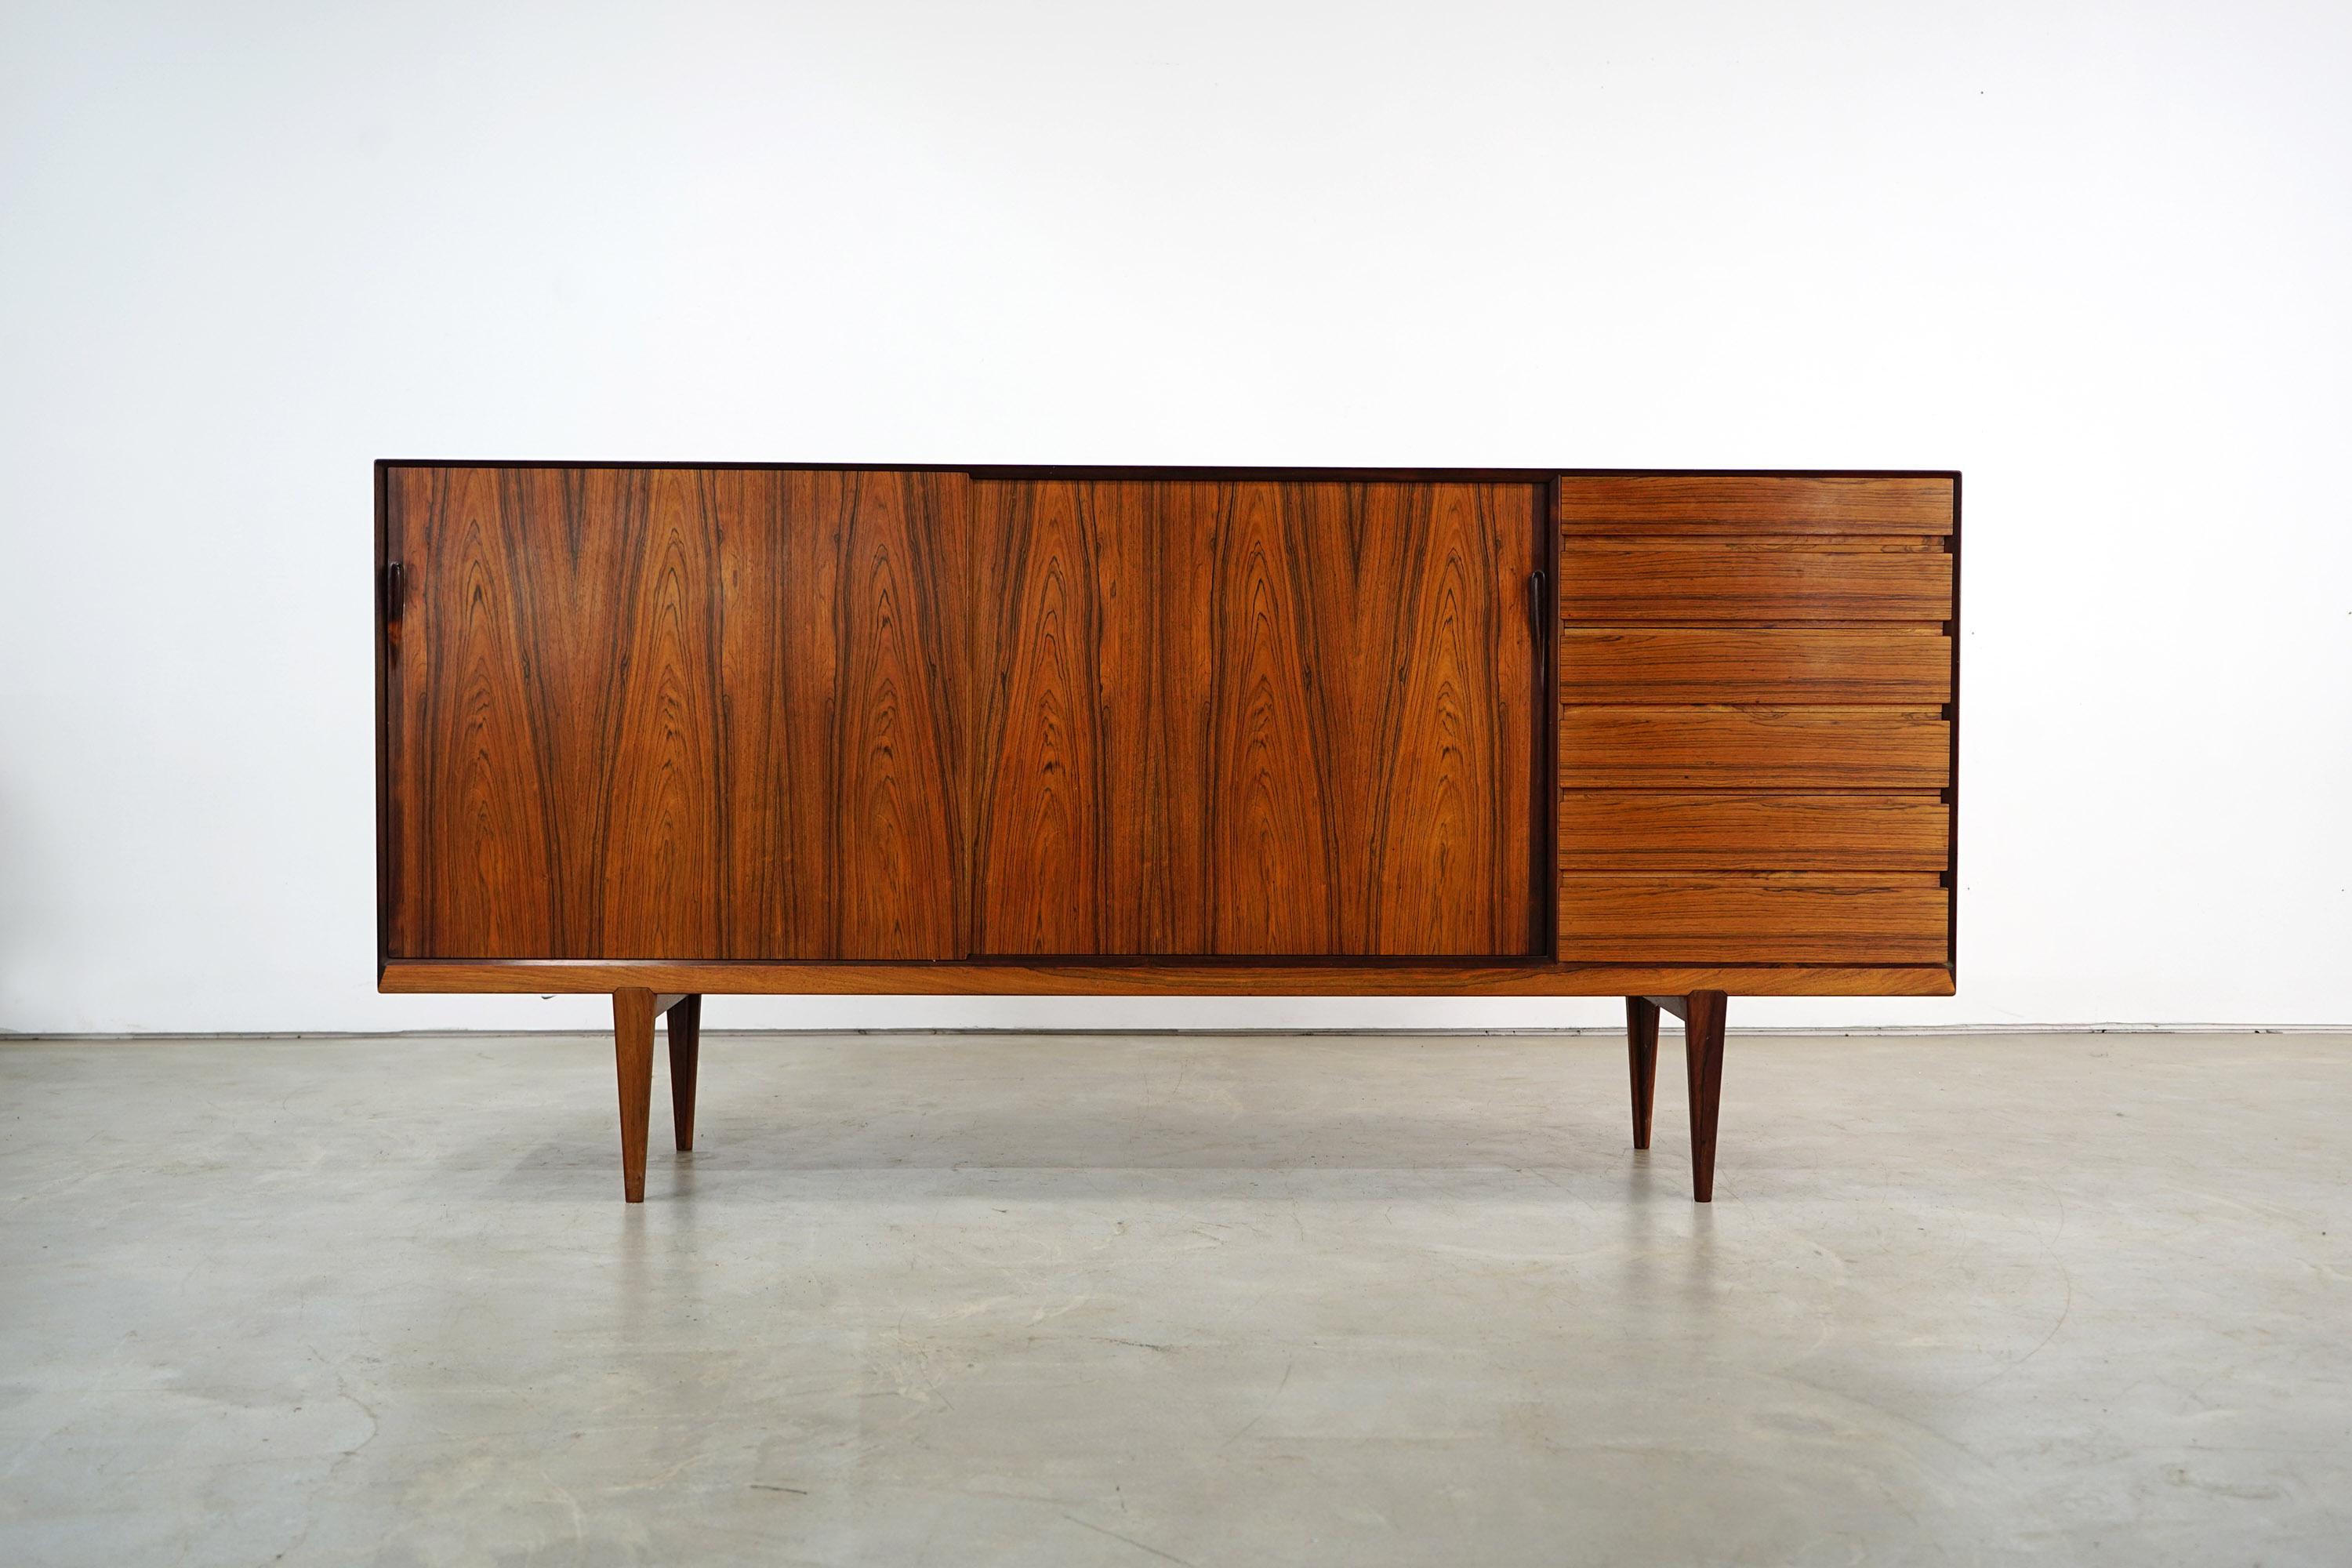 A rare piece of furniture from the early 1960s by Henry Rosengren Hansen for Brande Møbelindustrie. The sideboard exhibits minimalist forms with organic details. The piece is in excellent condition.